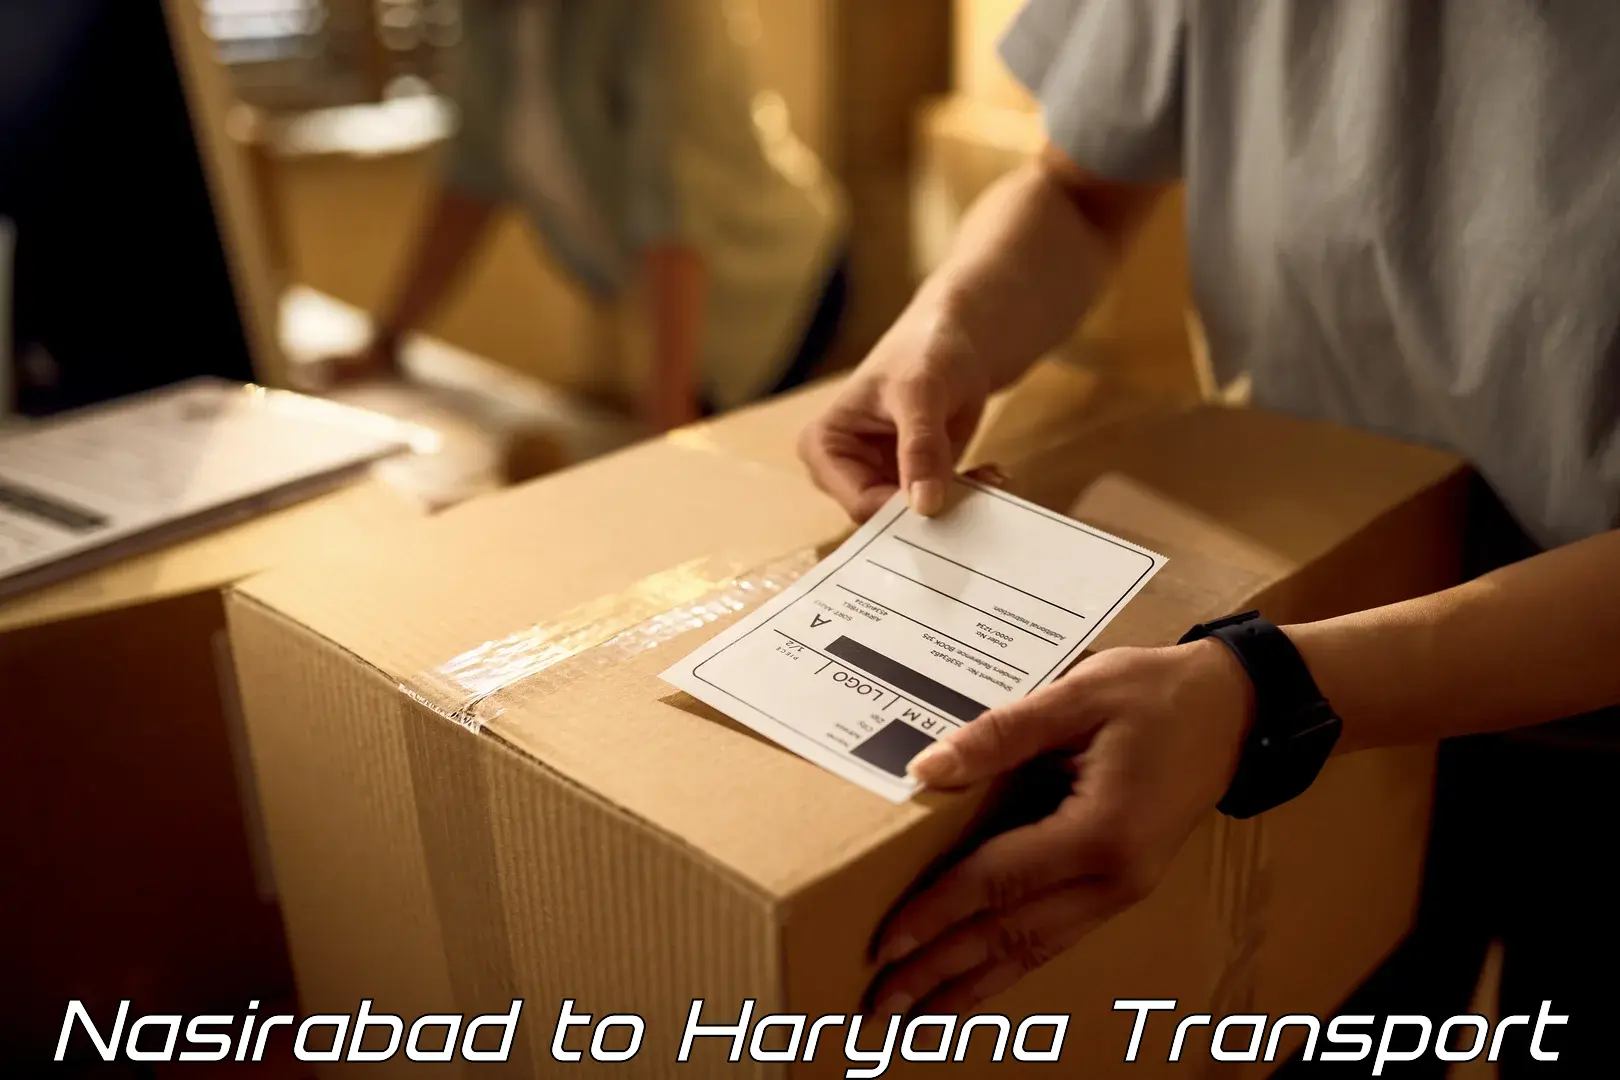 Road transport online services Nasirabad to NCR Haryana